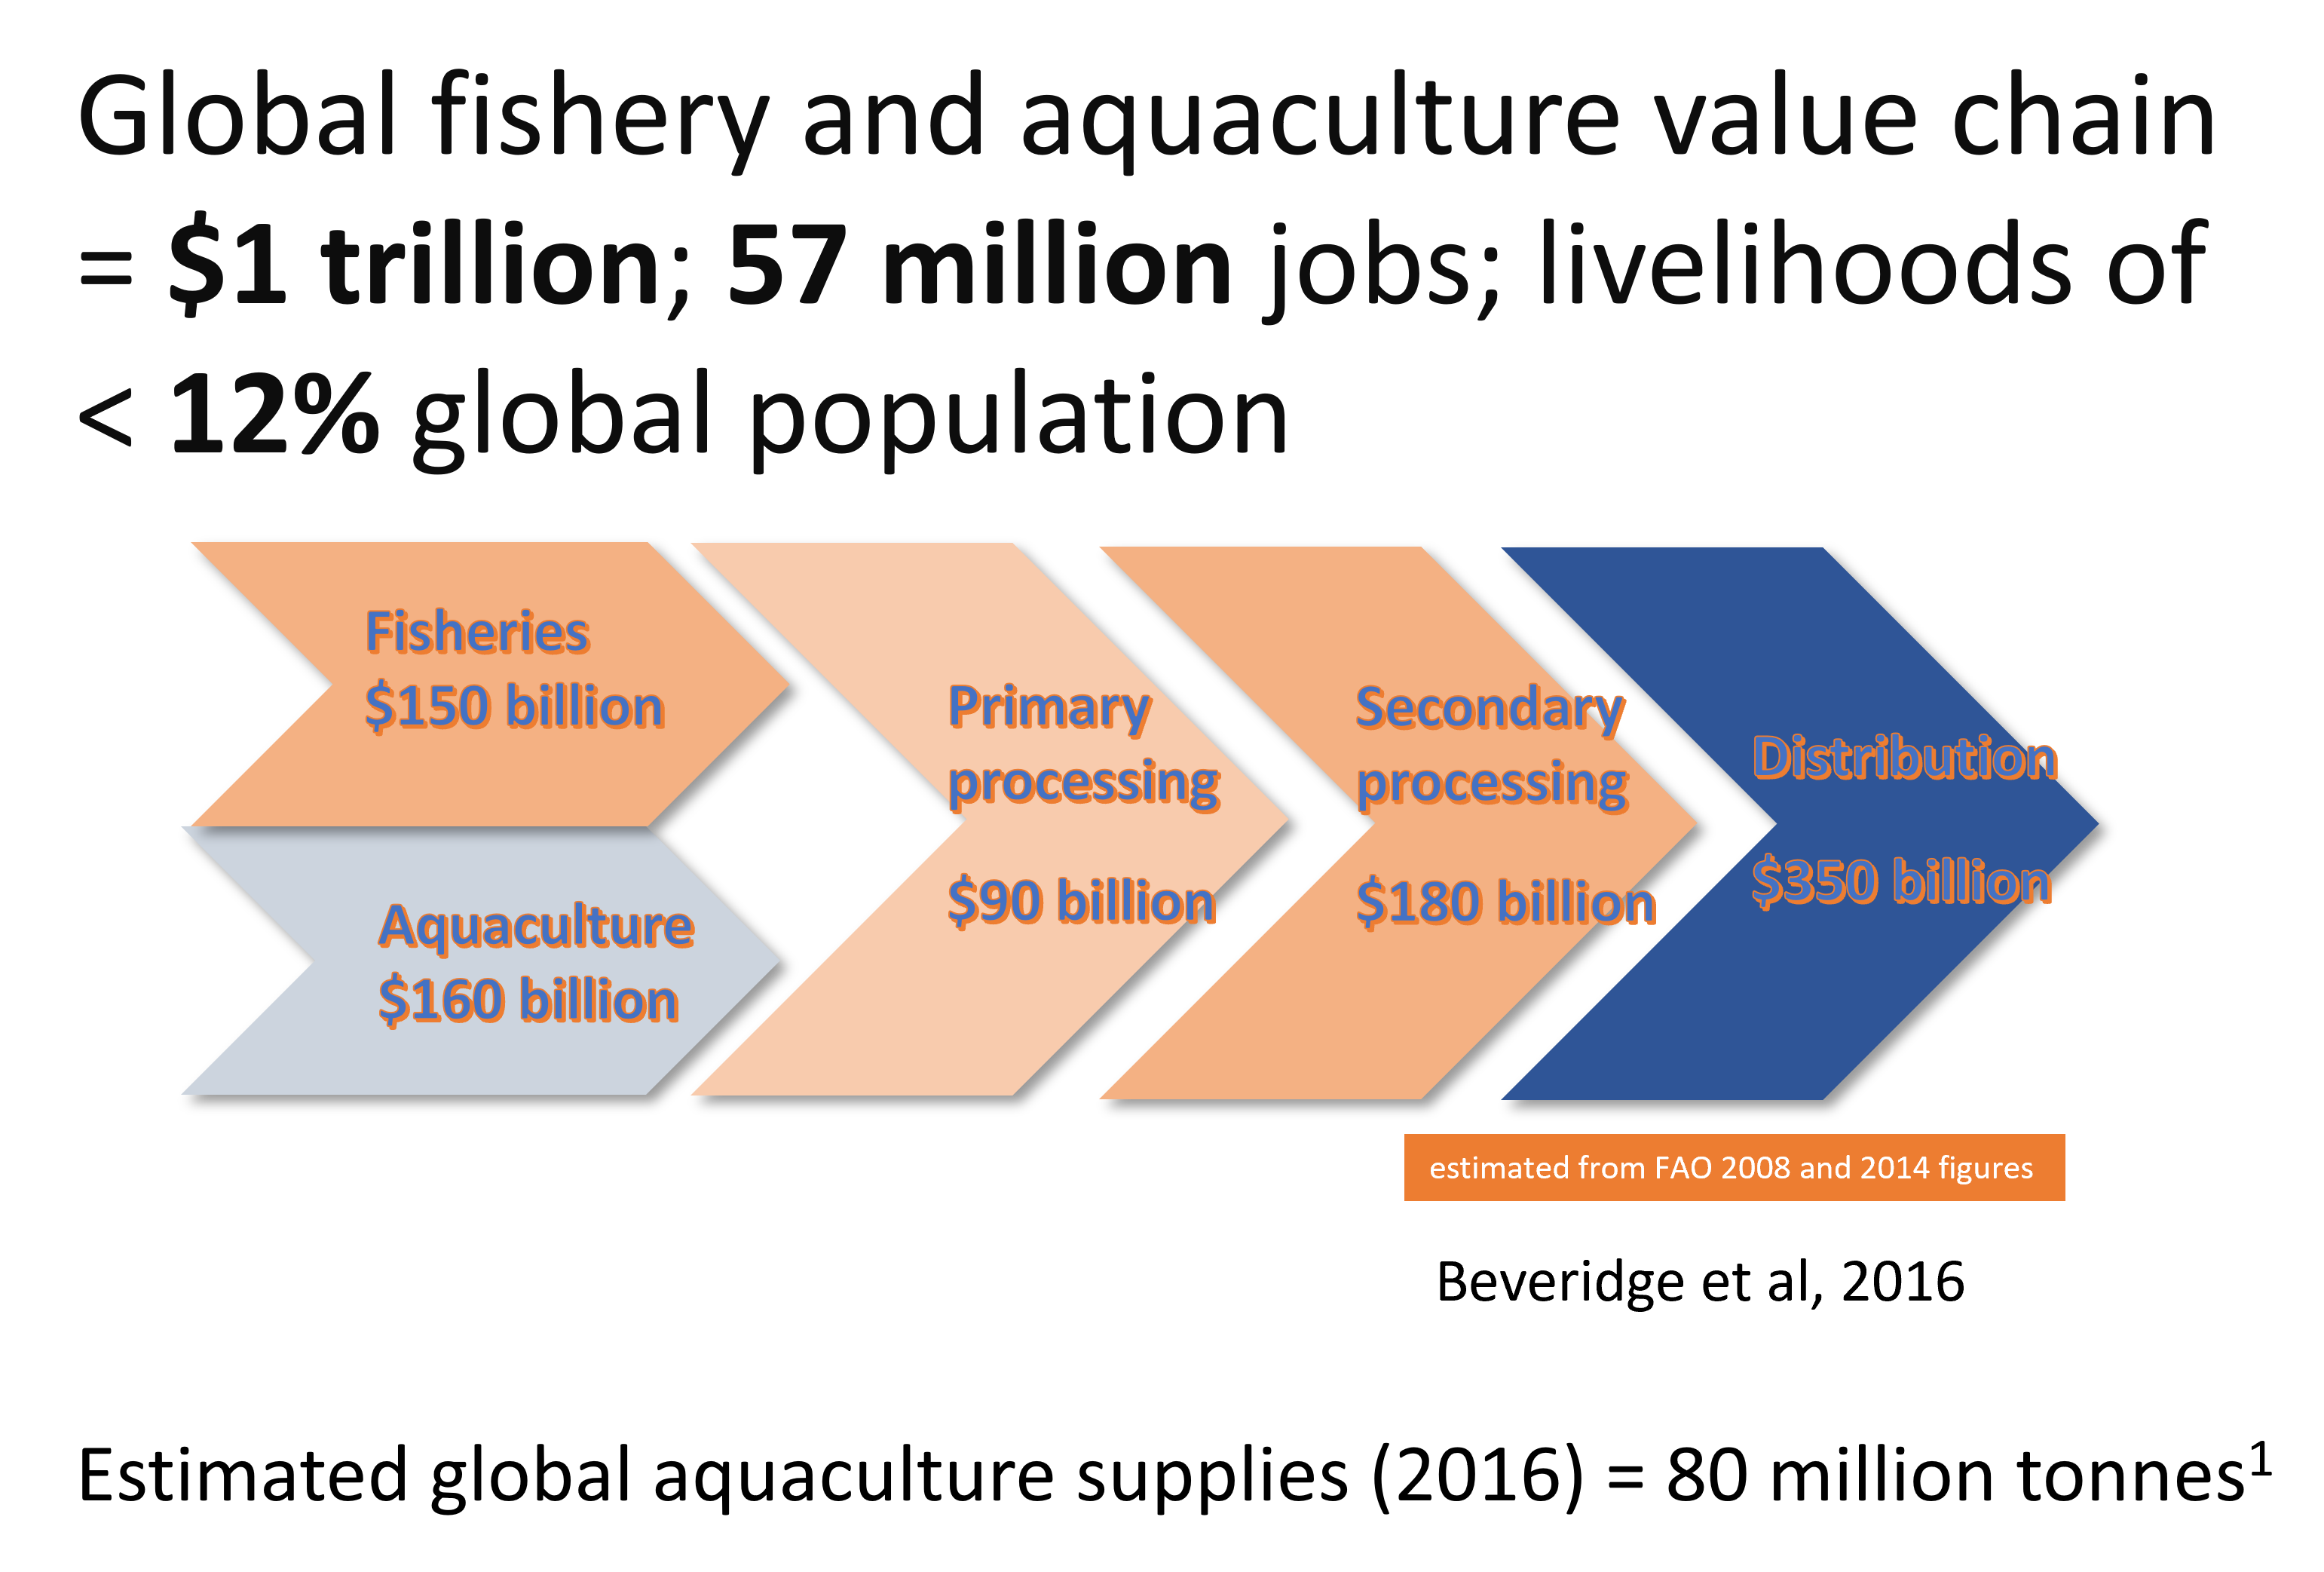 Simple arrow diagram indicating the value chain for aquaculture and capture fisheries supplies to the global market